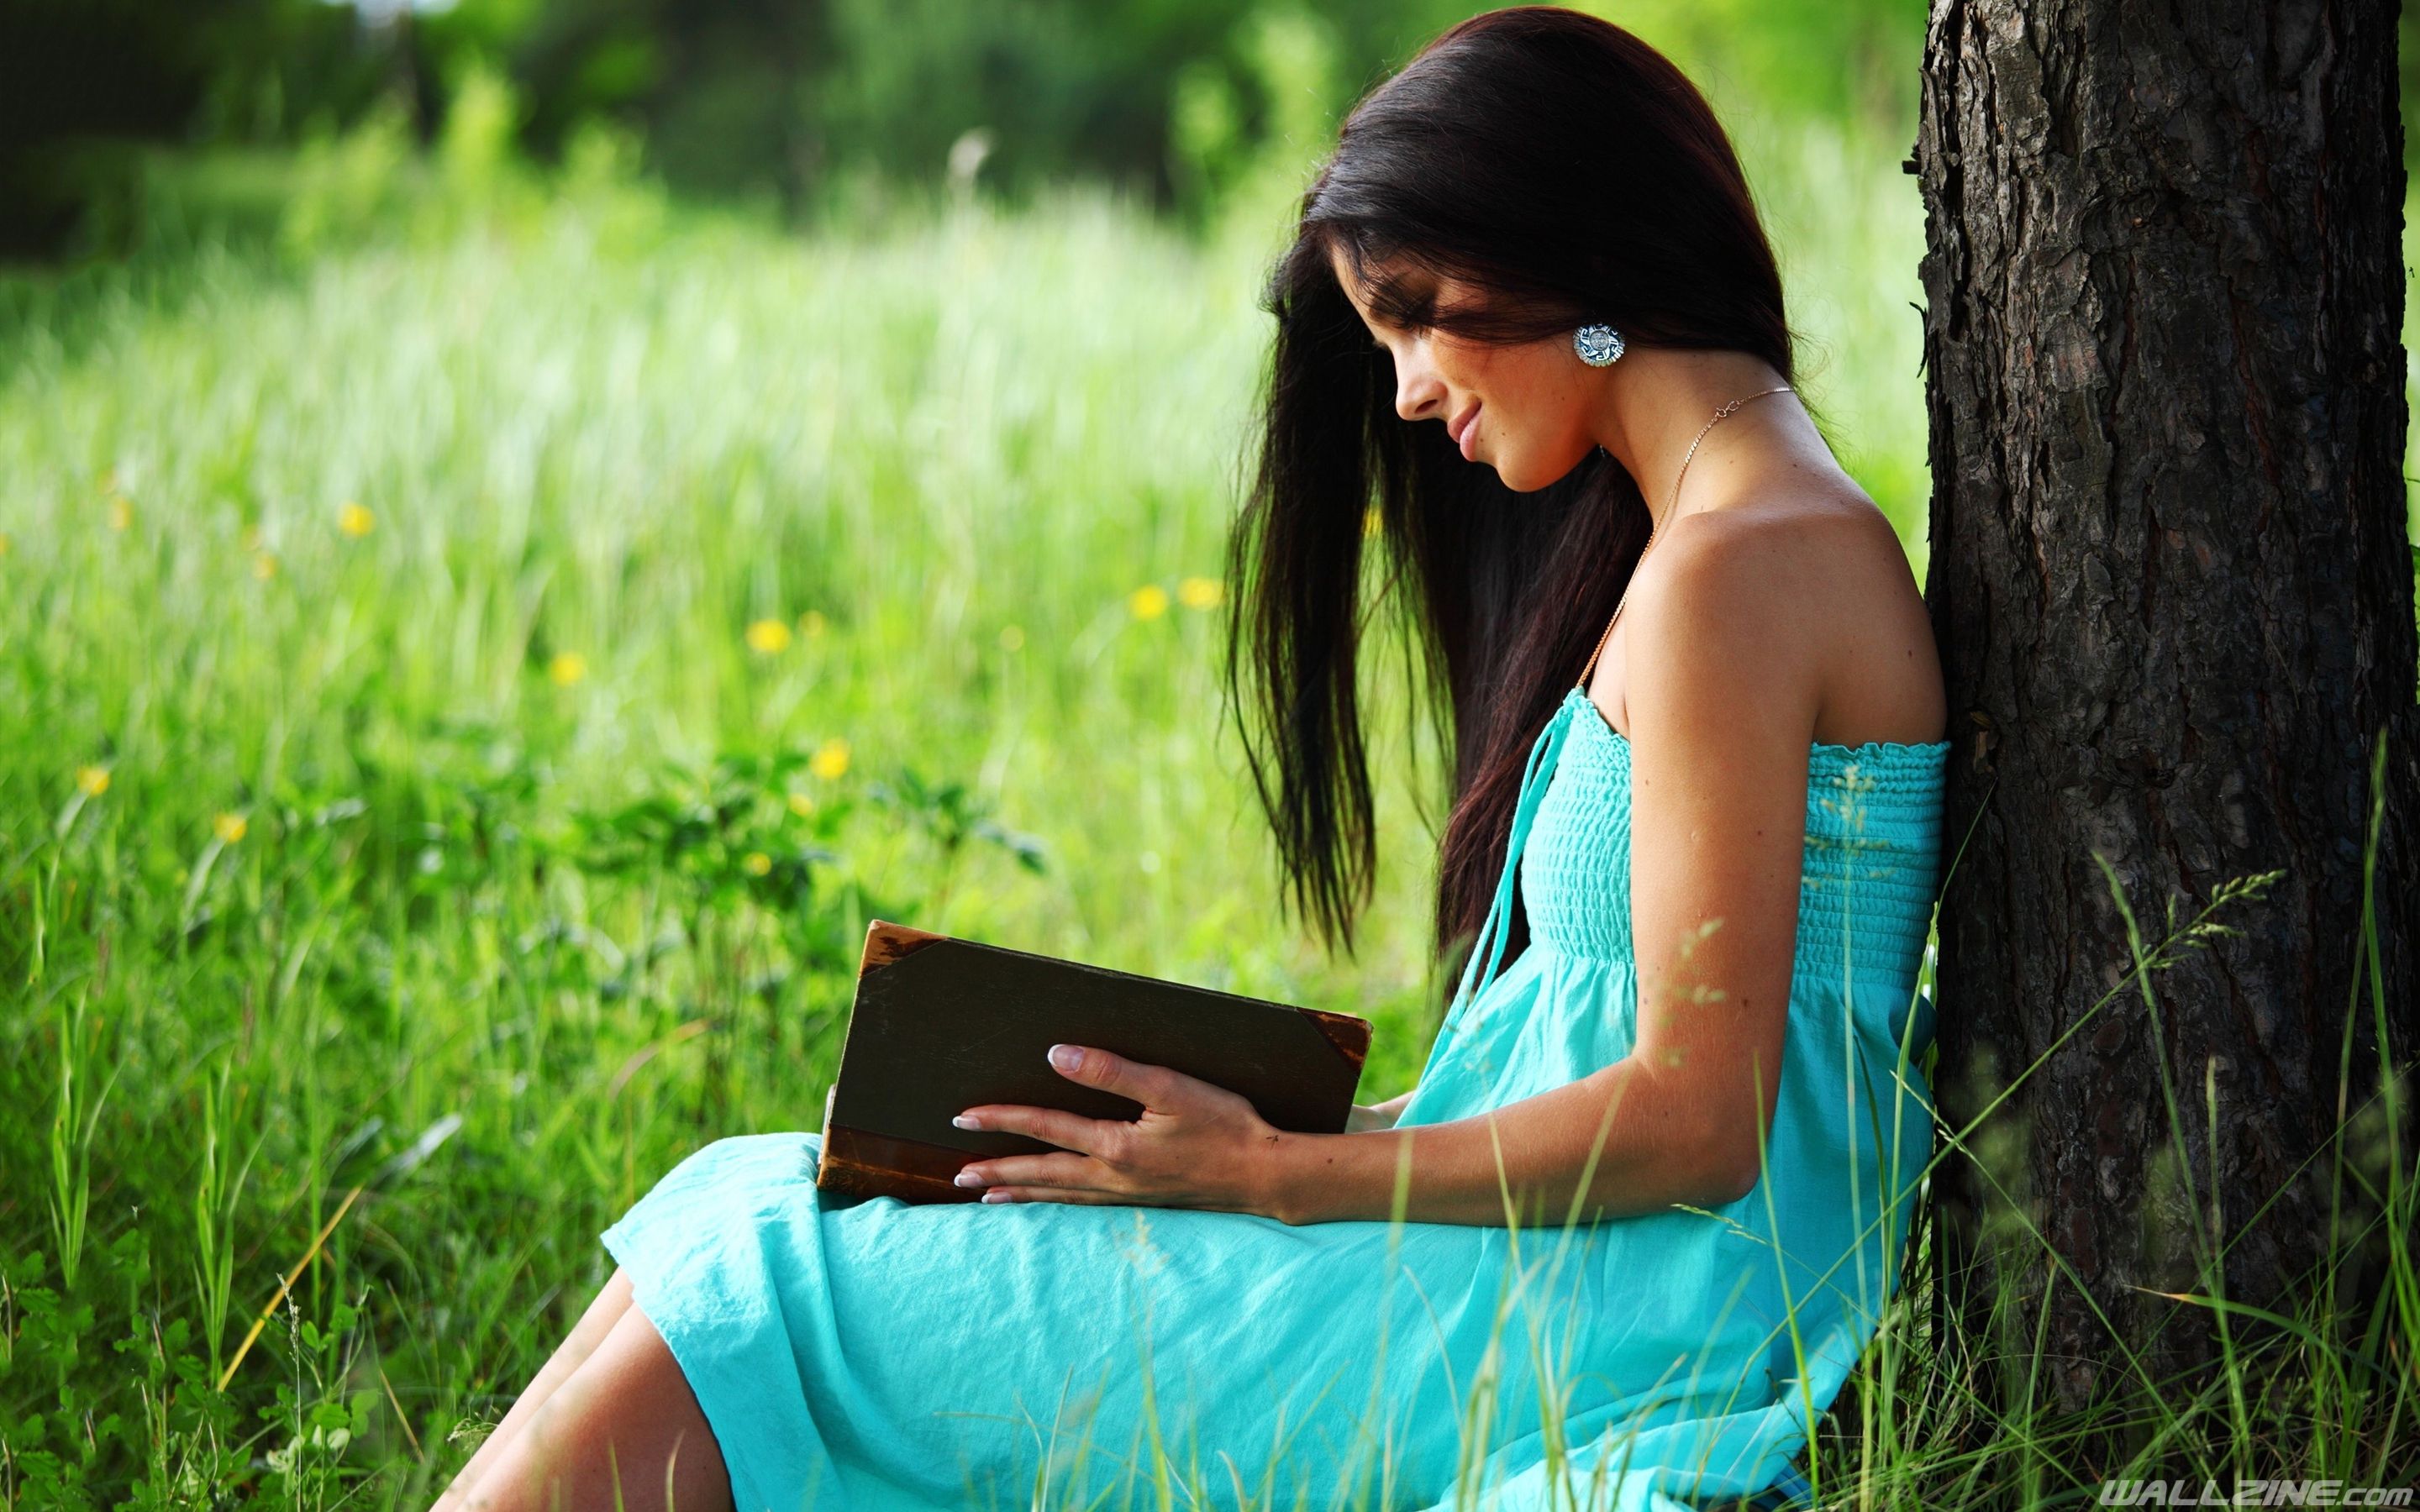 girl reading book wallpapers,people in nature,nature,green,grass,sitting